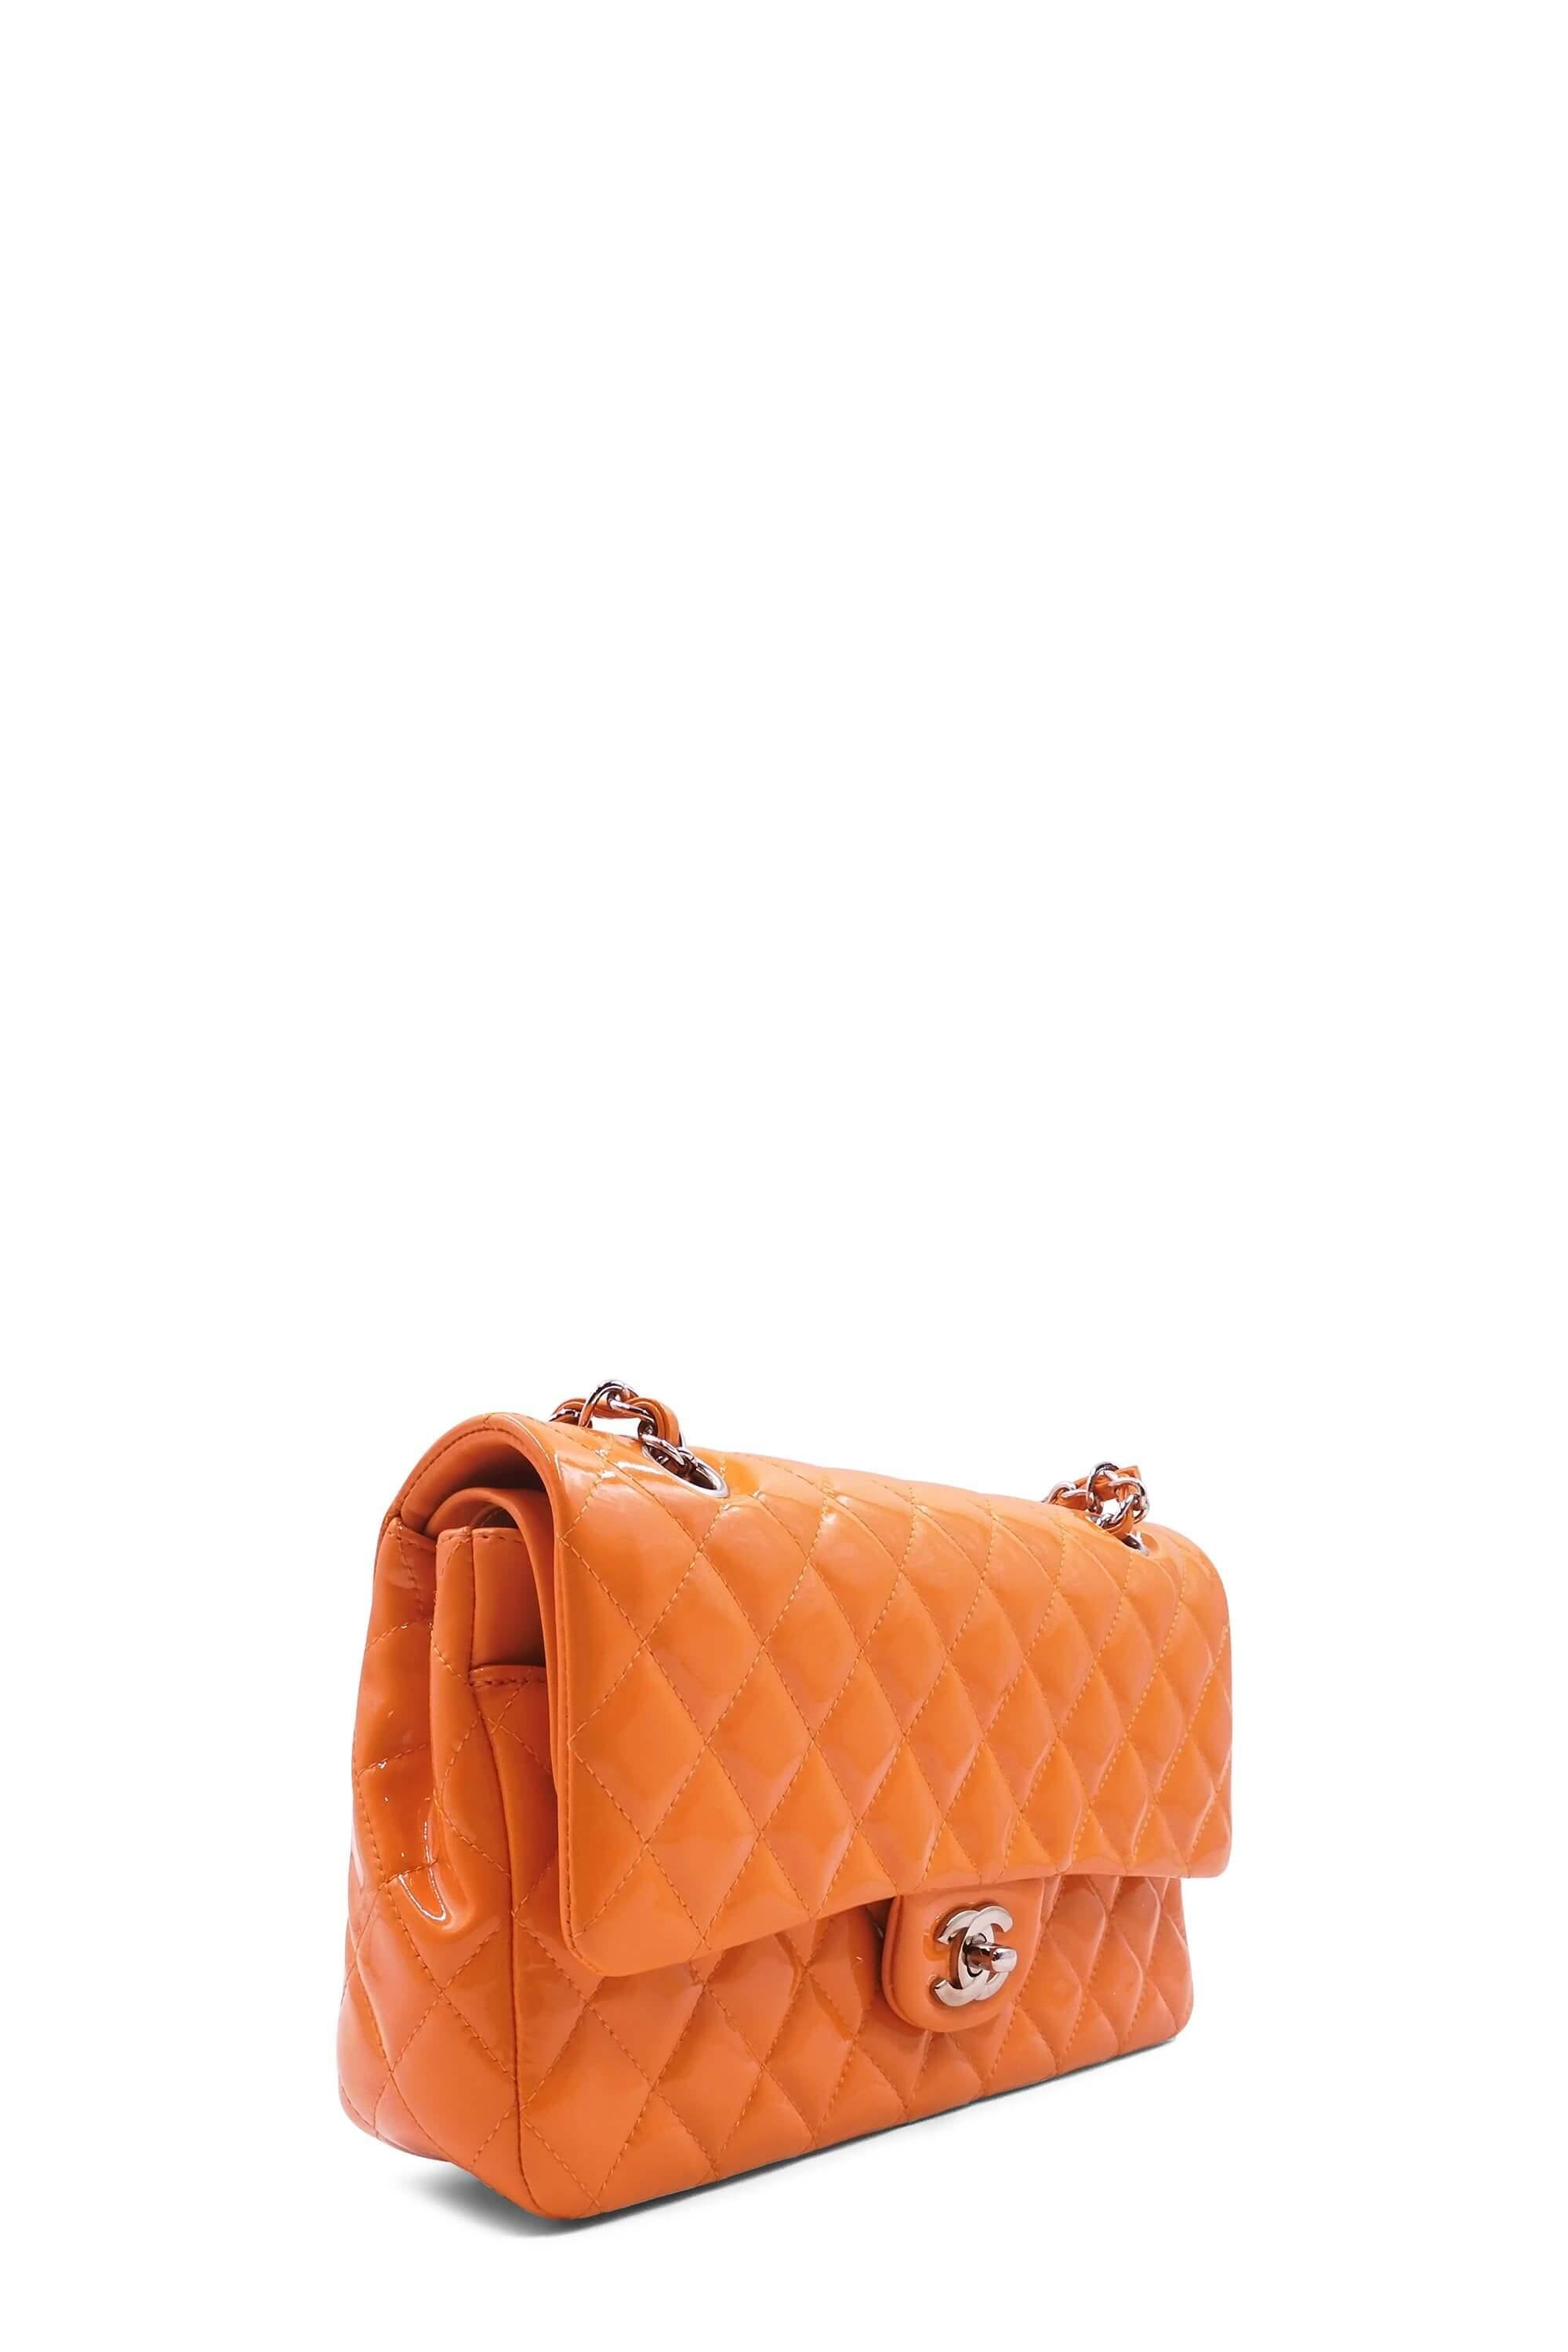 Chanel Classic Jumbo Double Flap Bag in Light Orange  Pink Patent Leather  with SilverTone Metal Hardware  Bags  Kabinet Privé